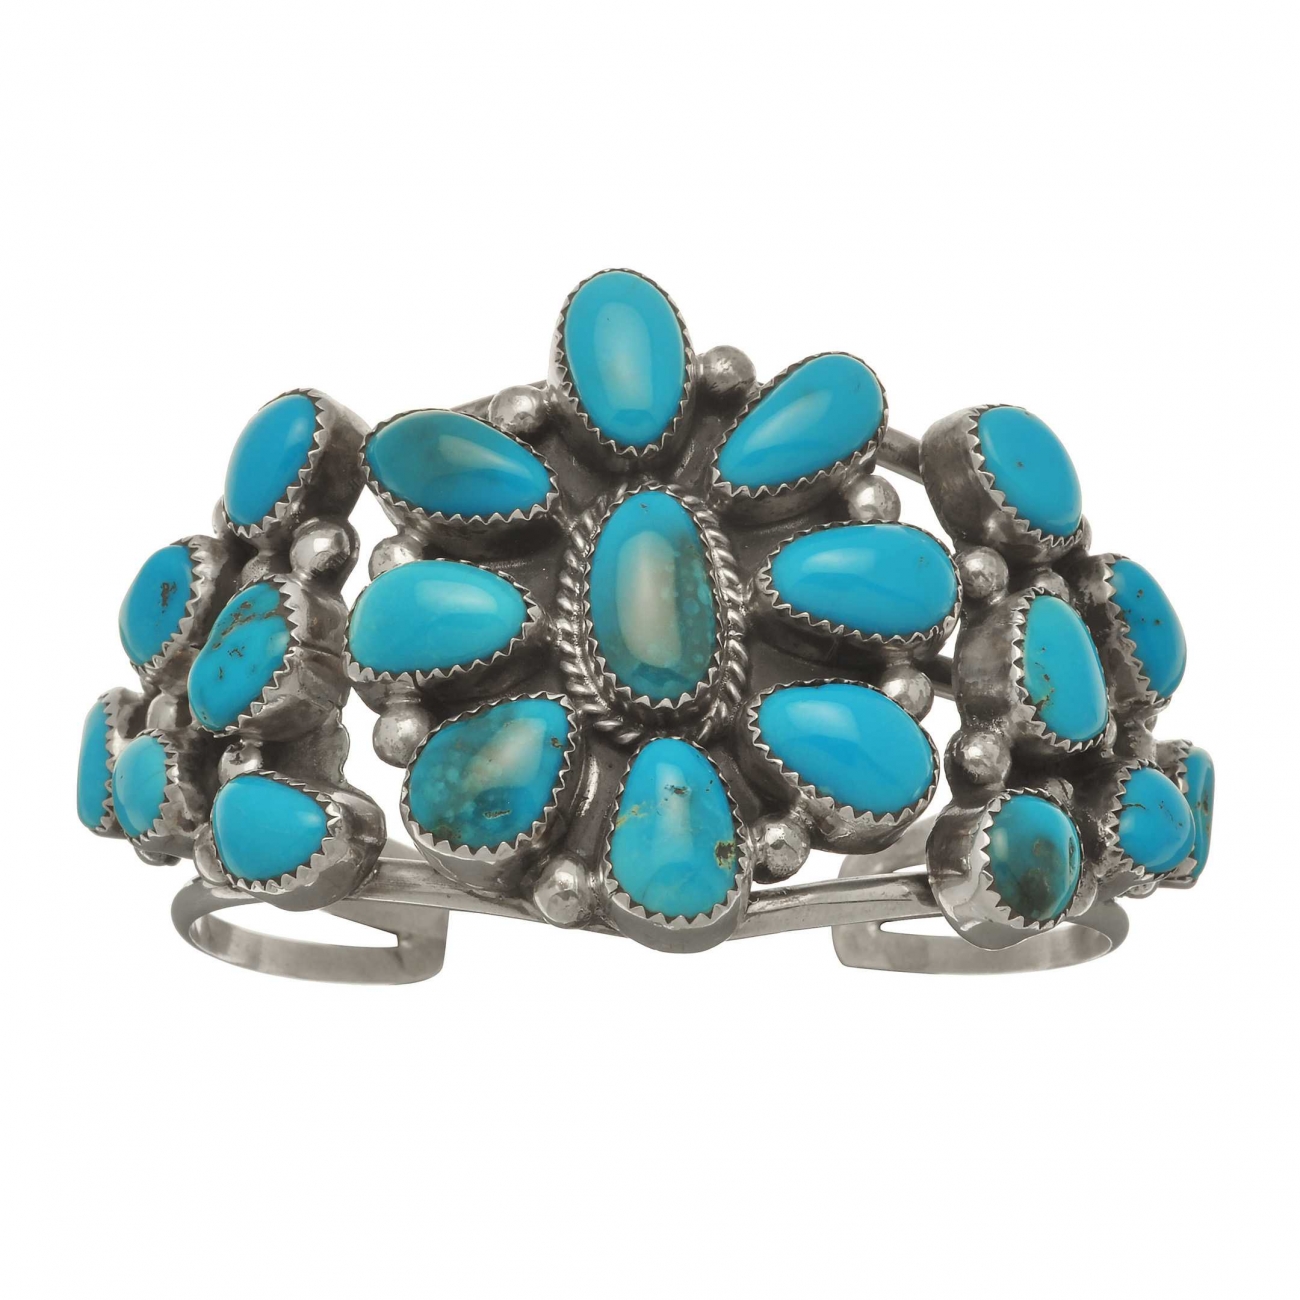 Cuff flower bracelet BR461 in turquoise and silver - Harpo Paris